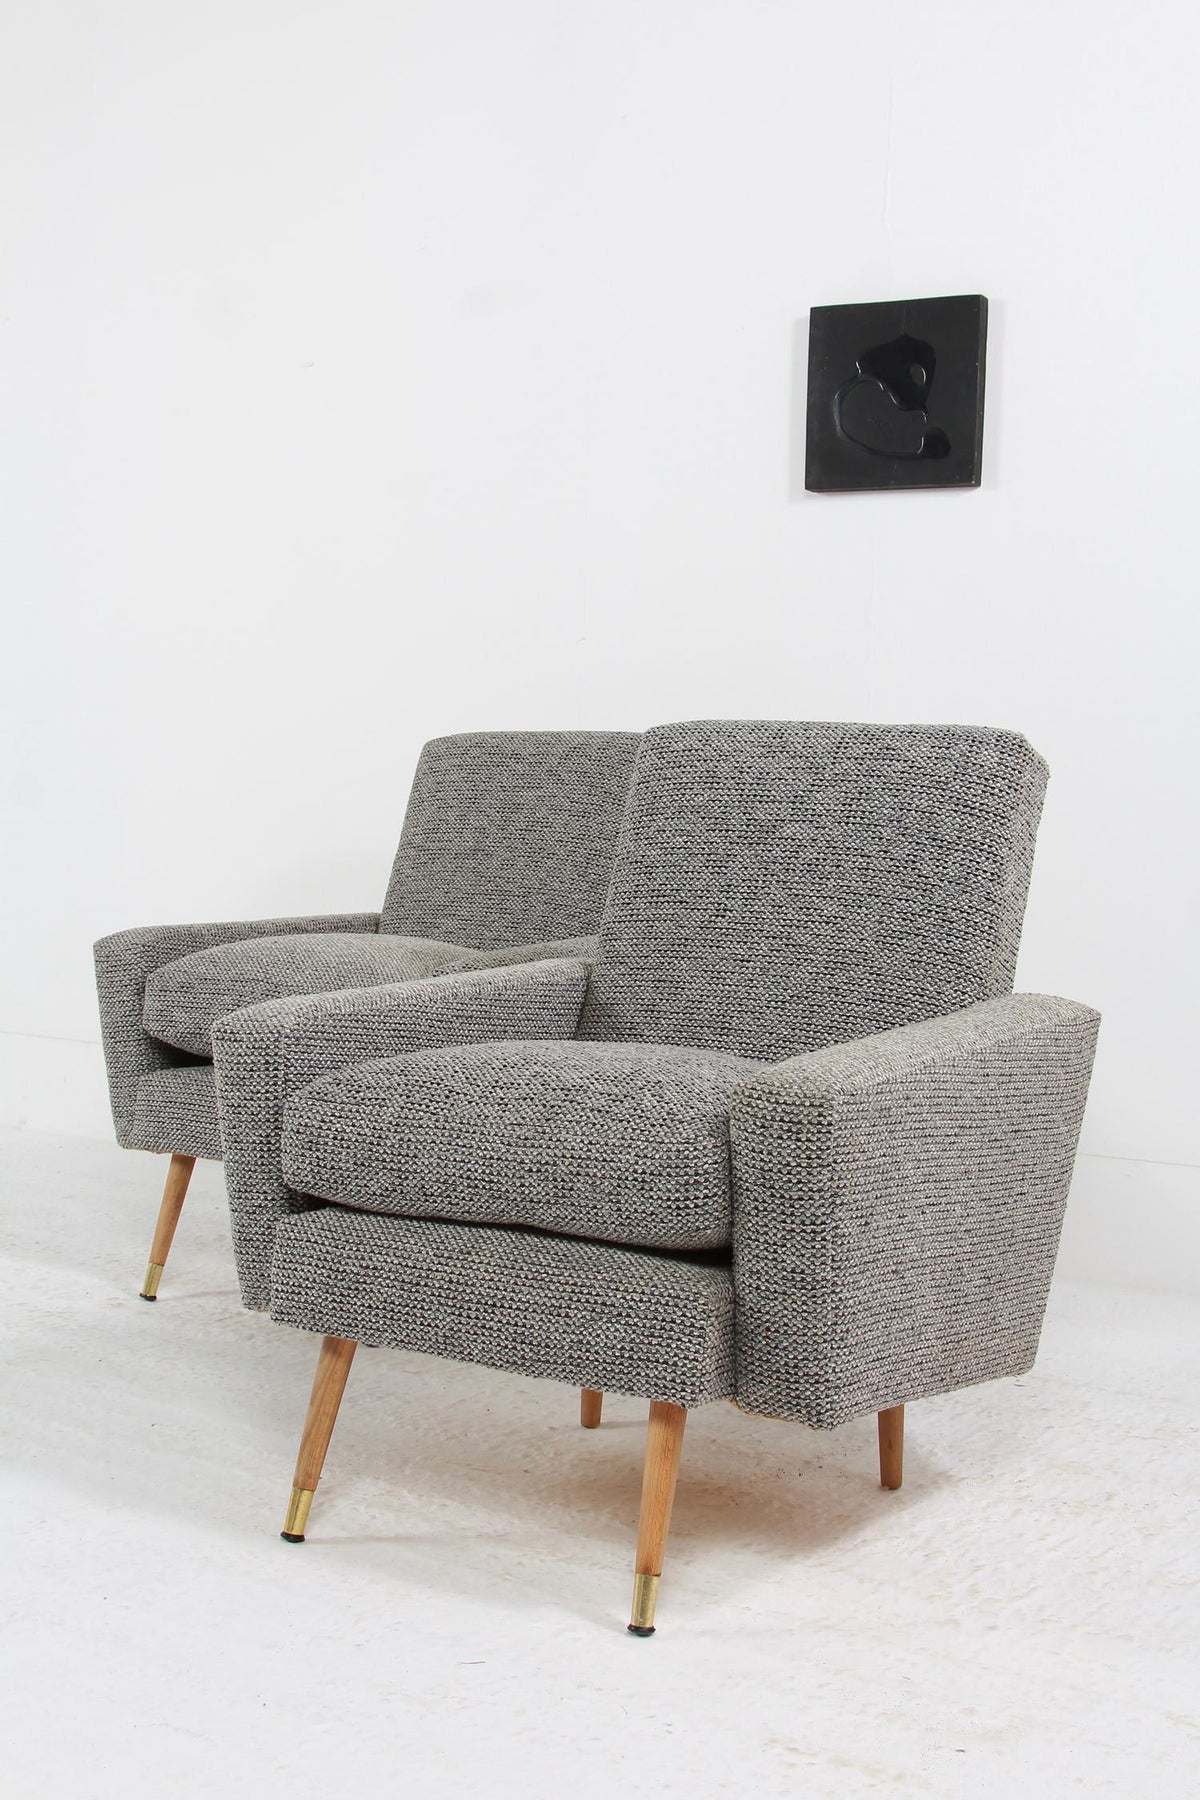 Pair of Sculptural French Mid-Century Modern Lounge Chairs